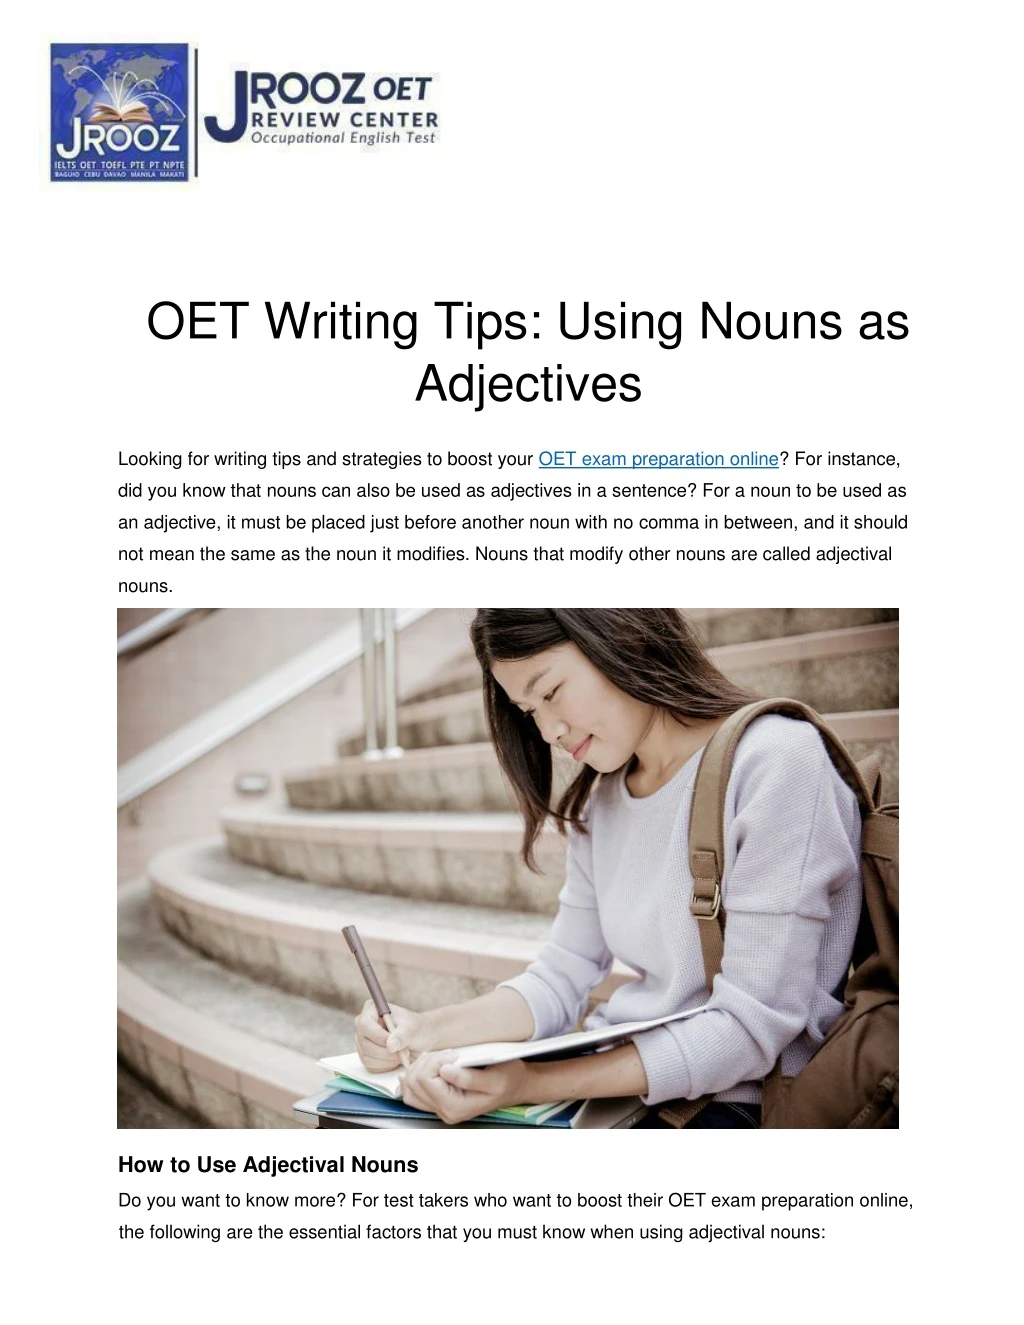 oet writing tips using nouns as adjectives